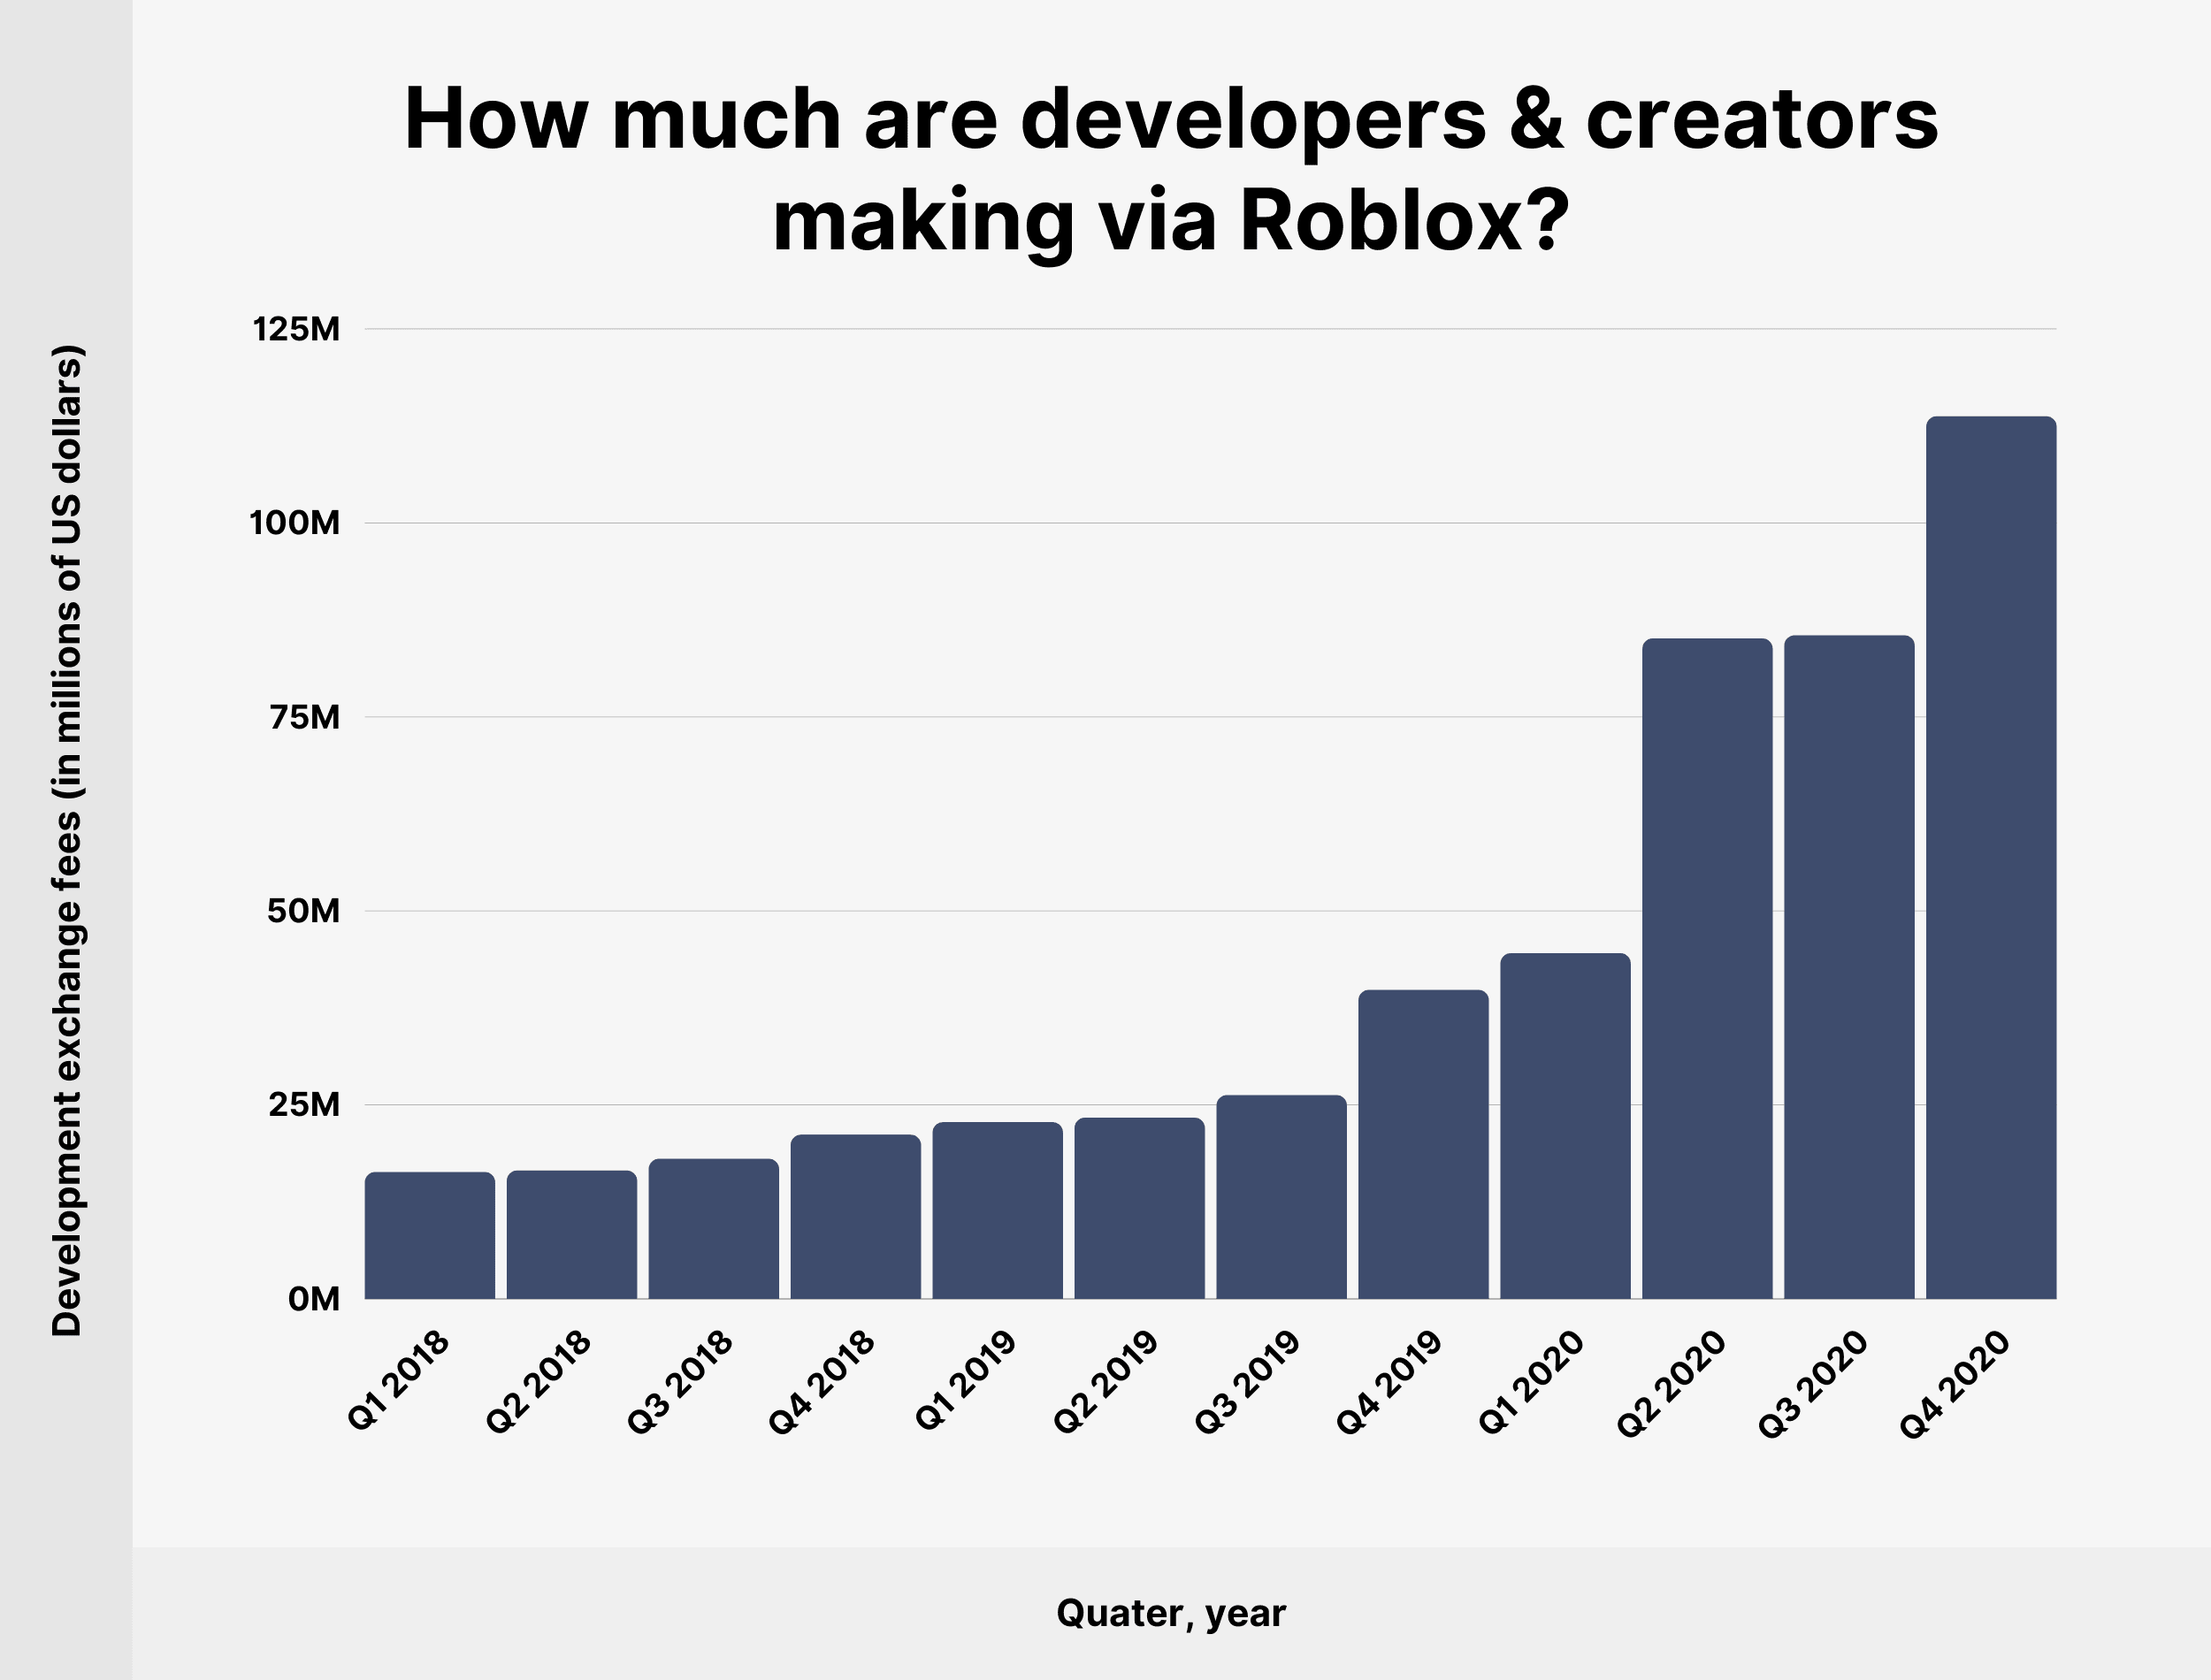 How much are developers & creators making via Roblox?